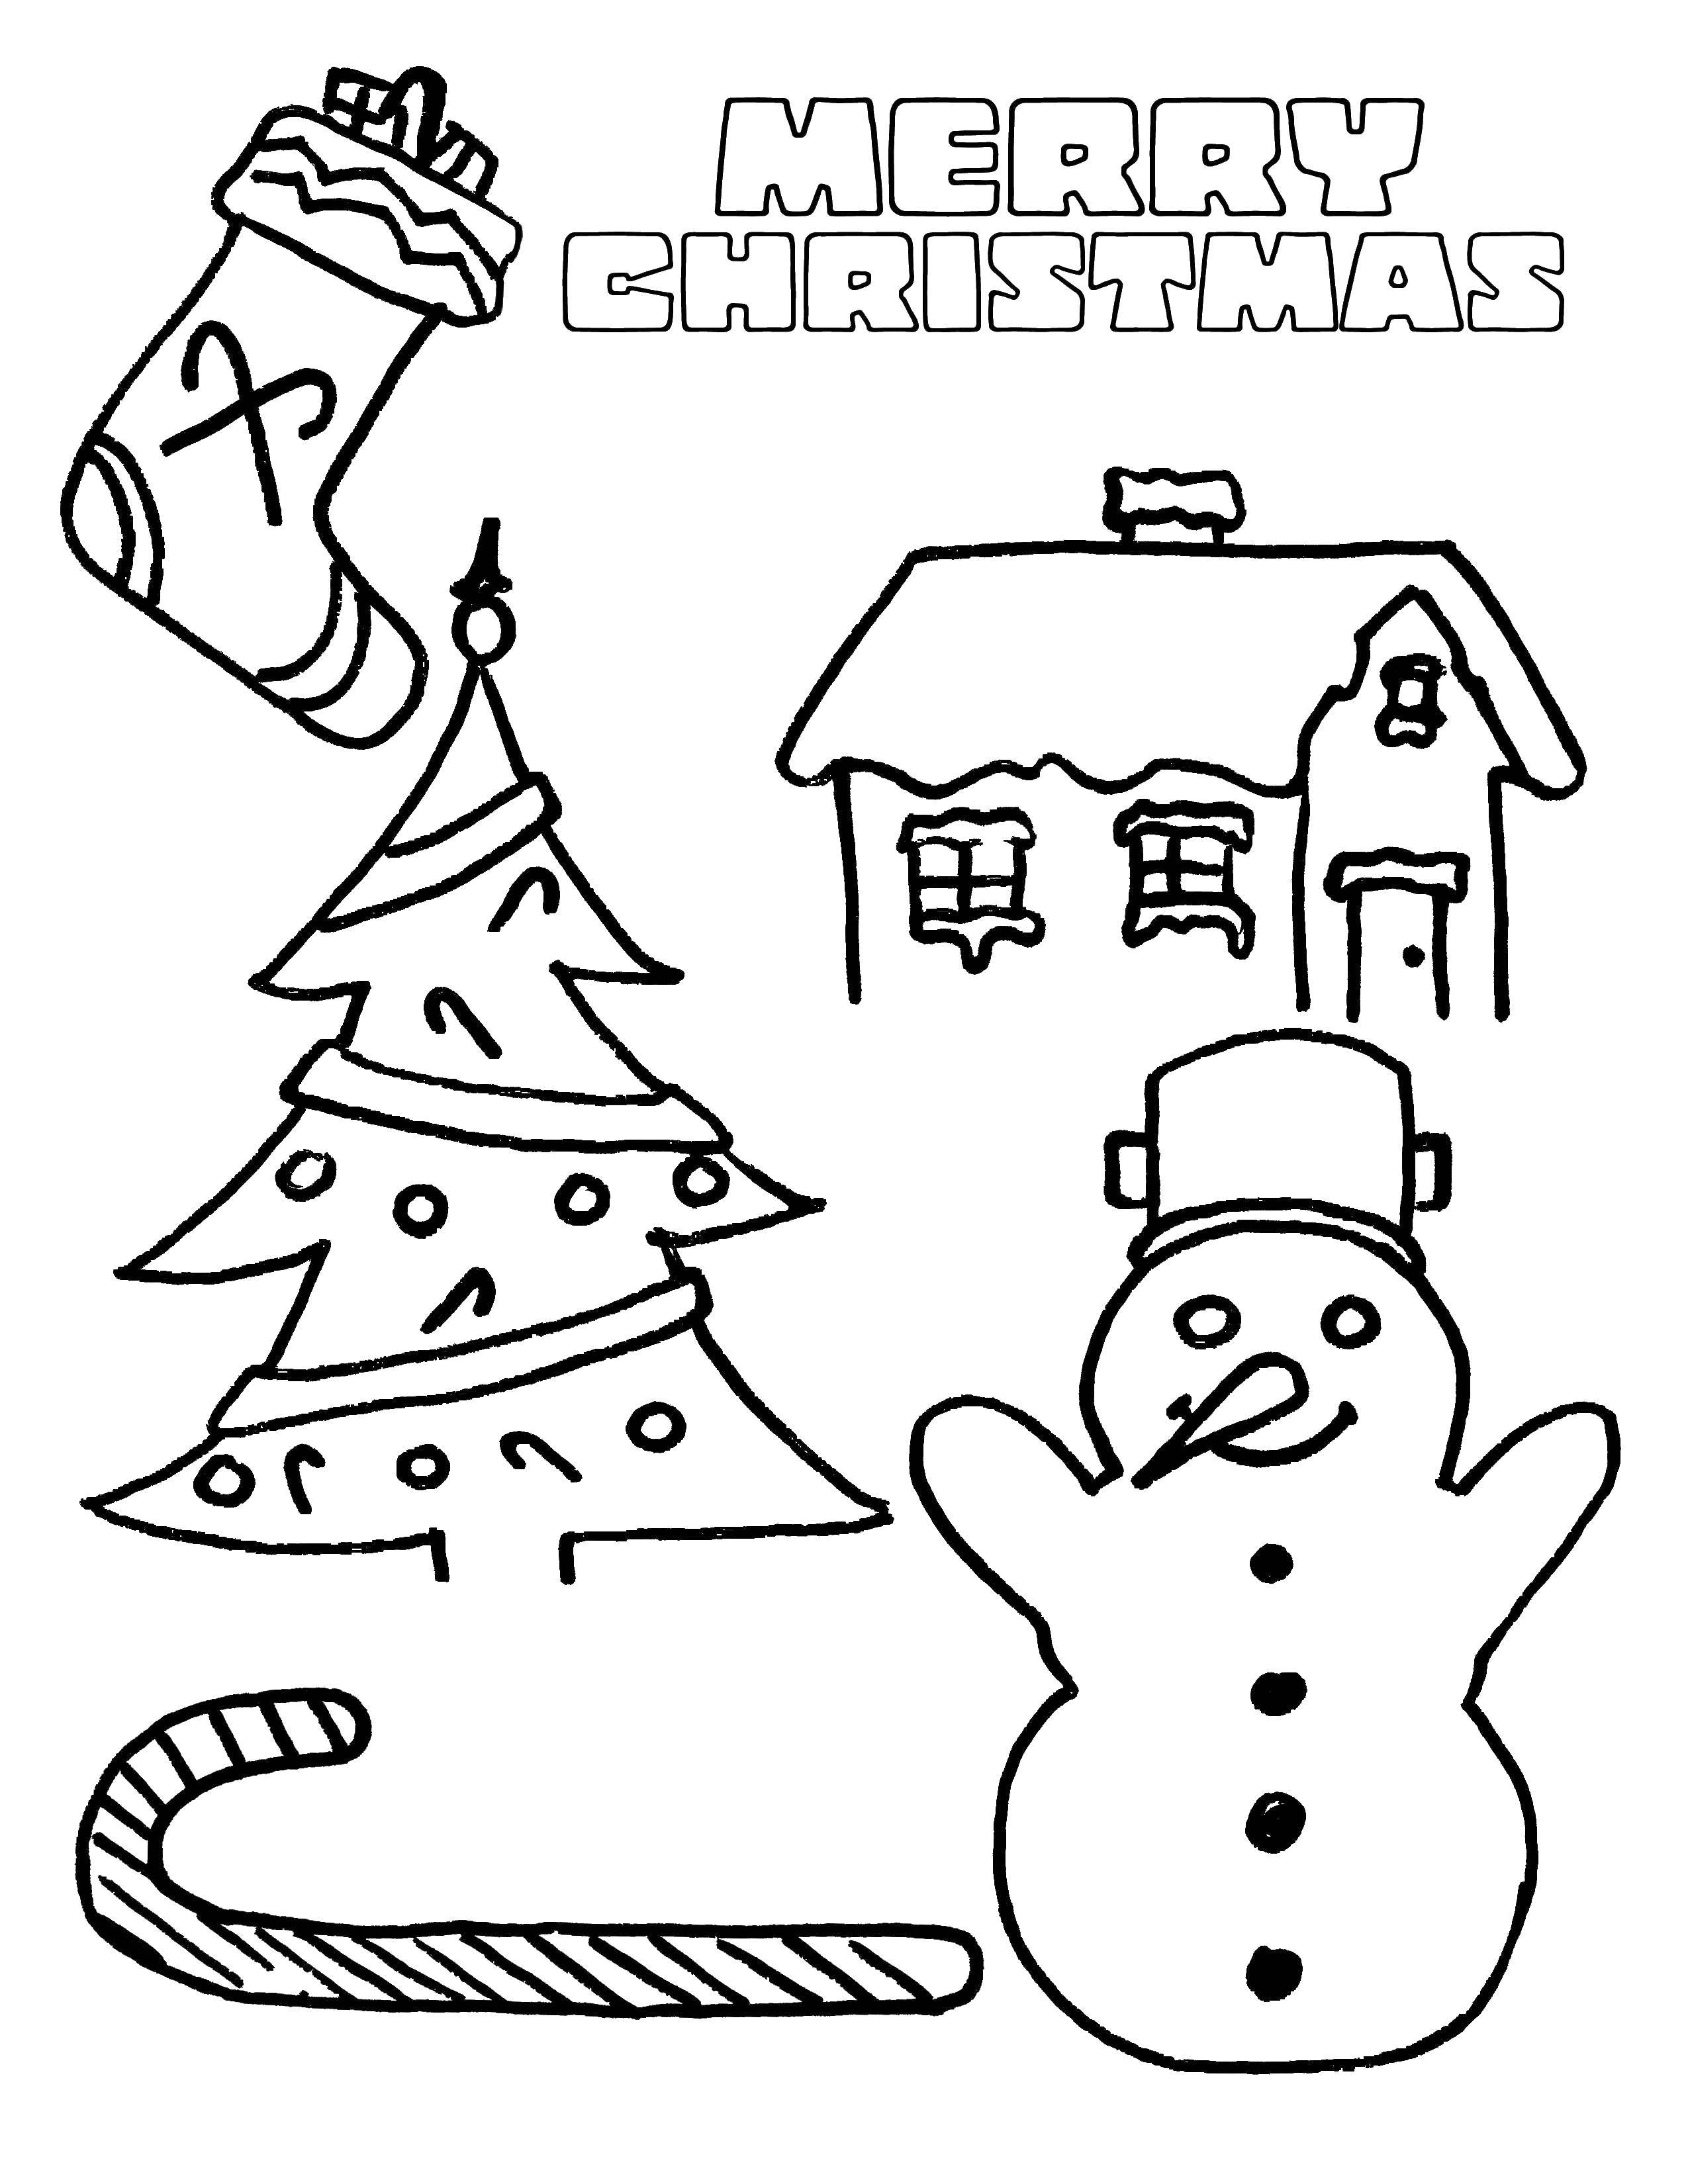 Coloring Merry Christmas!. Category Christmas. Tags:  Christmas, Christmas toy, Christmas tree, gifts.